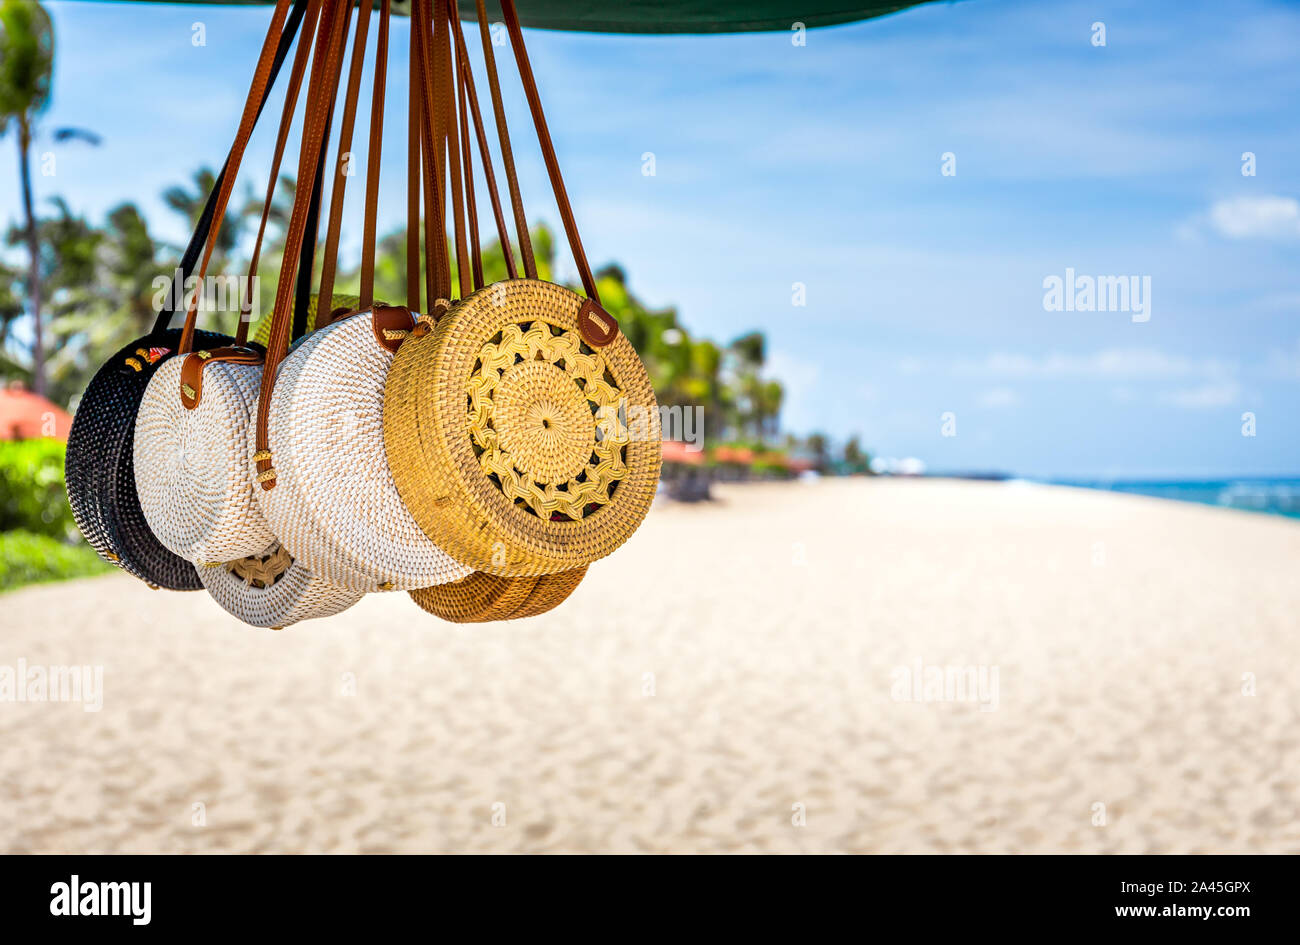 Traditional souvenirs on balinese beach in Indonesia Stock Photo